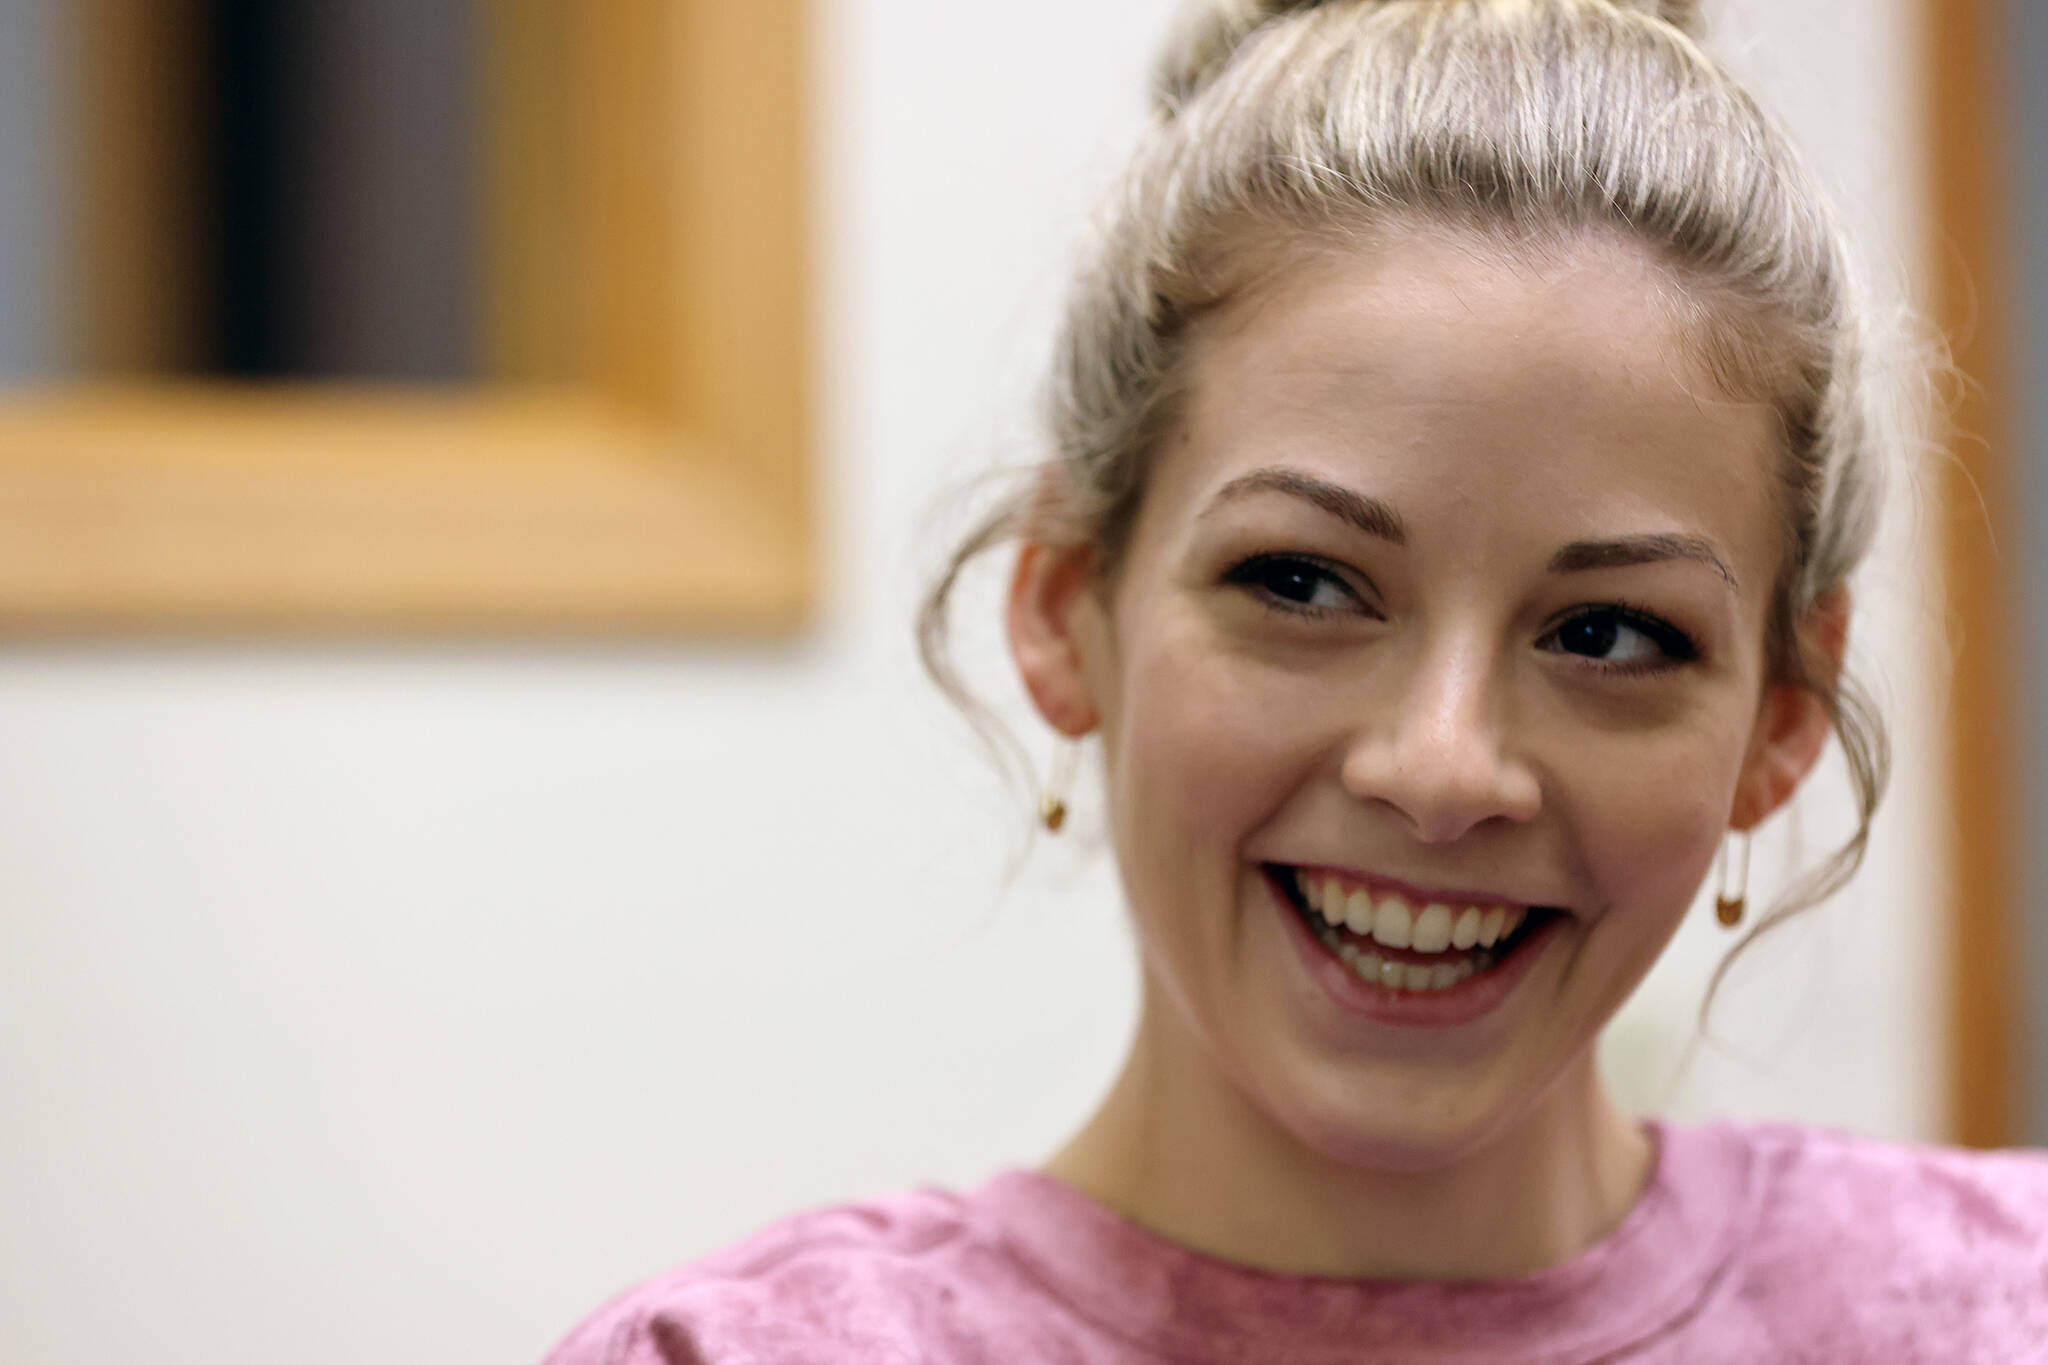 Two-time national champion and Olympic bronze medalist Gracie Gold talks with the Juneau Empire about her upcoming speech at Juneau-Douglas High School: Yadaa.at Kalé on Saturday, Sept. 10 at 6 p.m.